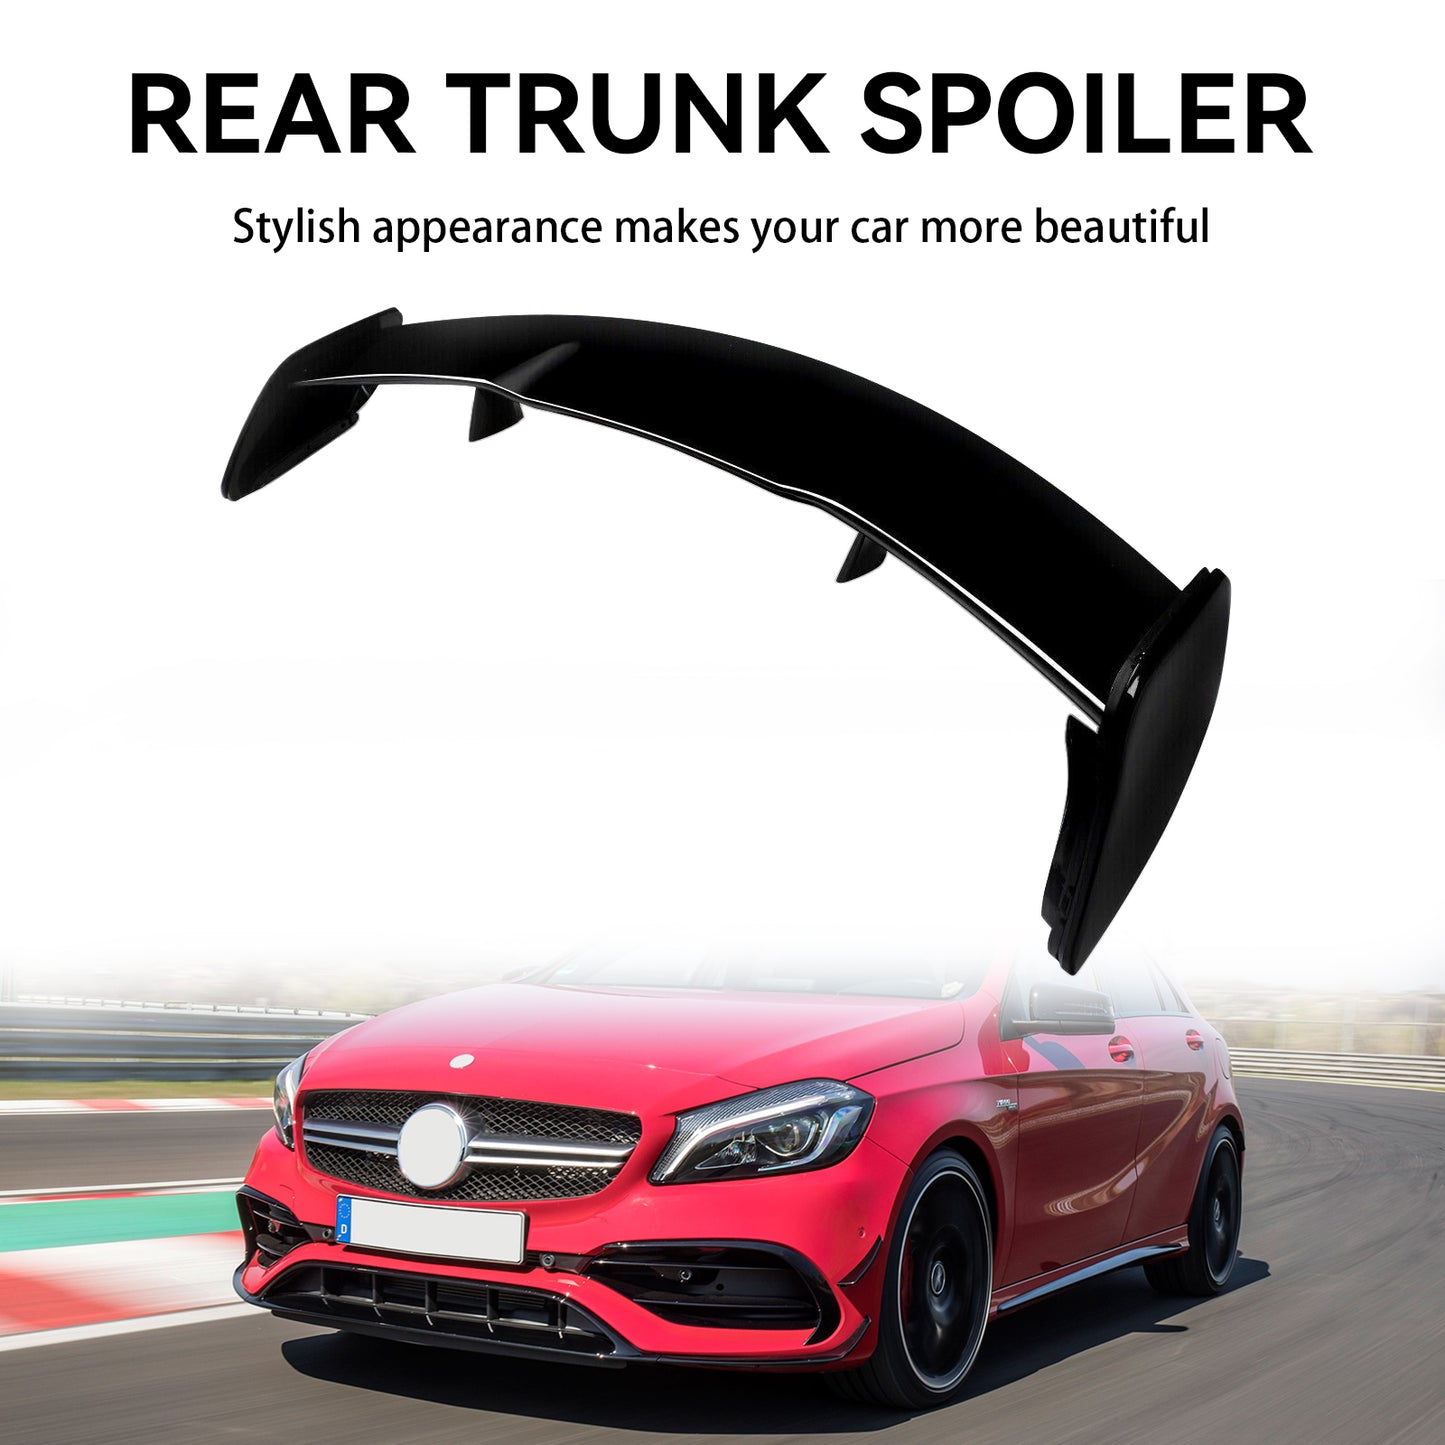 2013-2018 Mercedes A Class W176 AMG Style Rear Roof Car Spoiler Wing Black